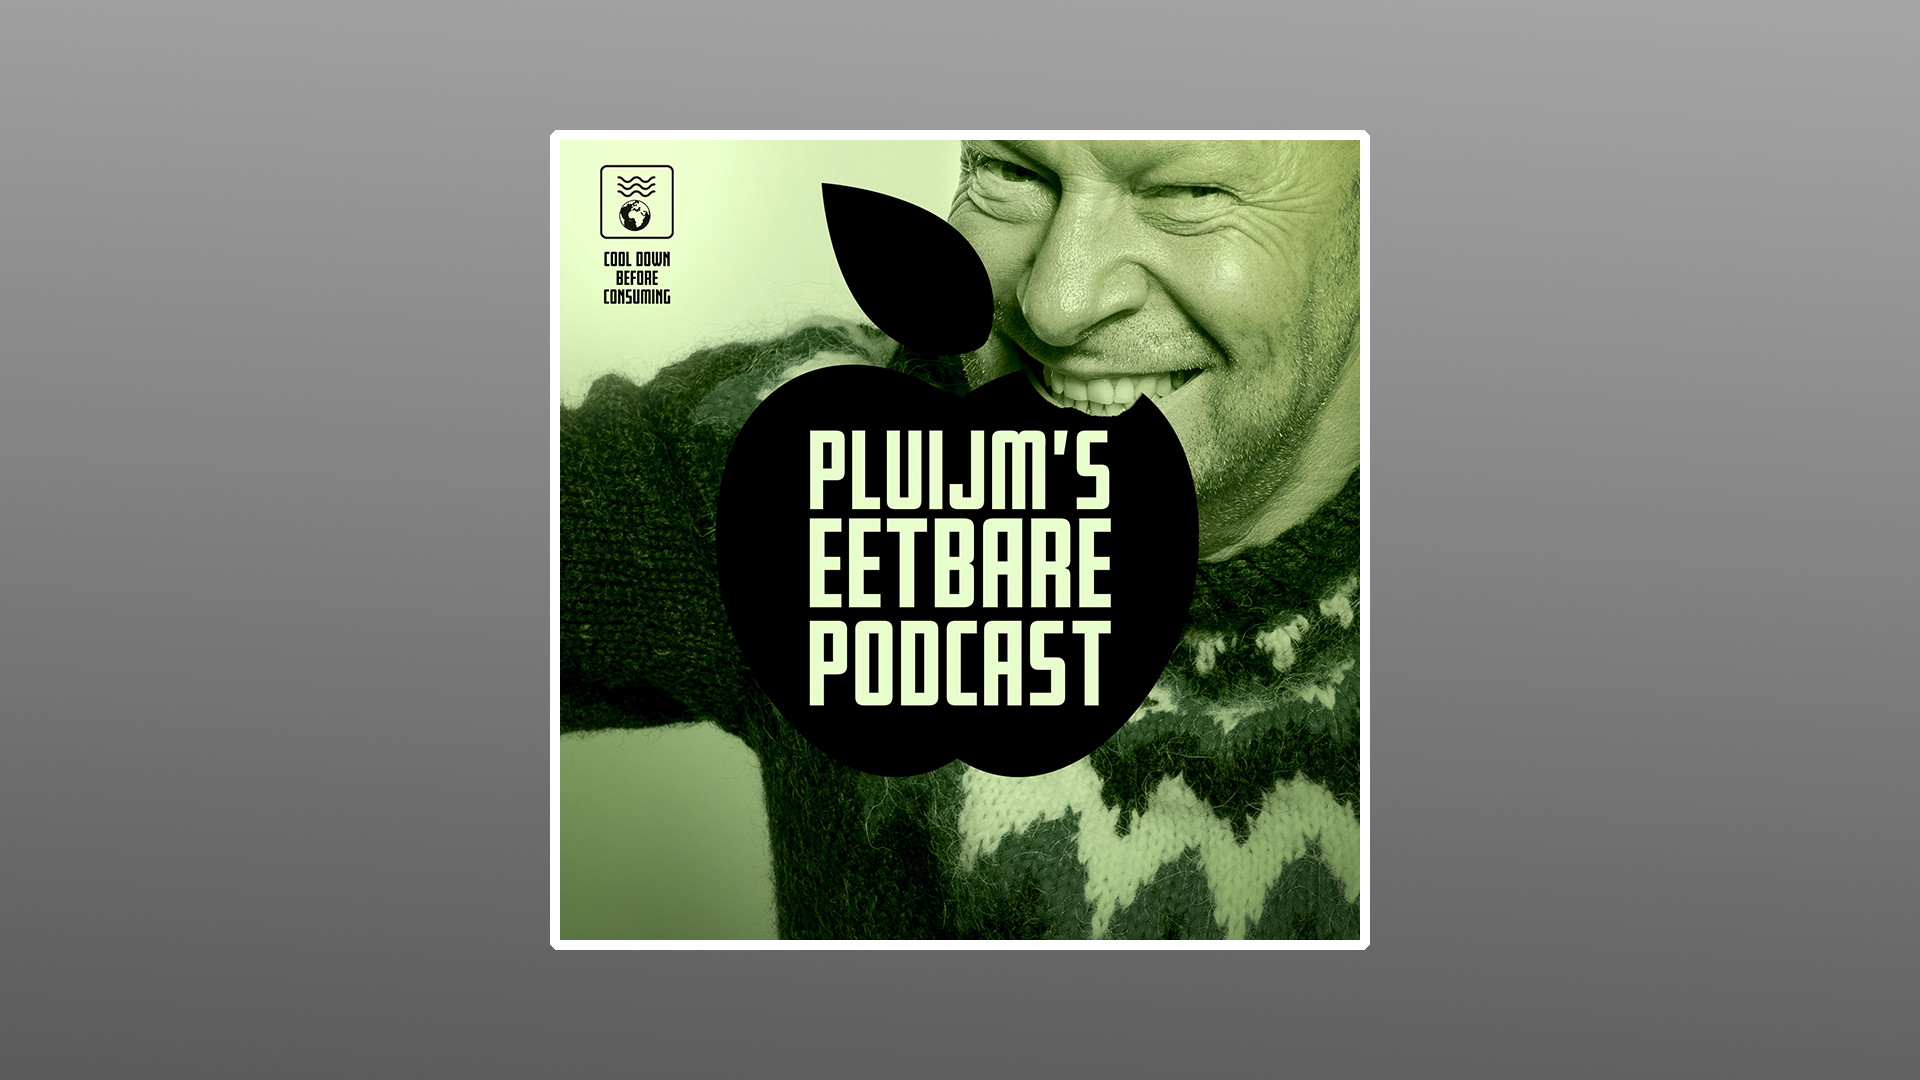 Pluijms Eetbare Podcast | podcast hosting